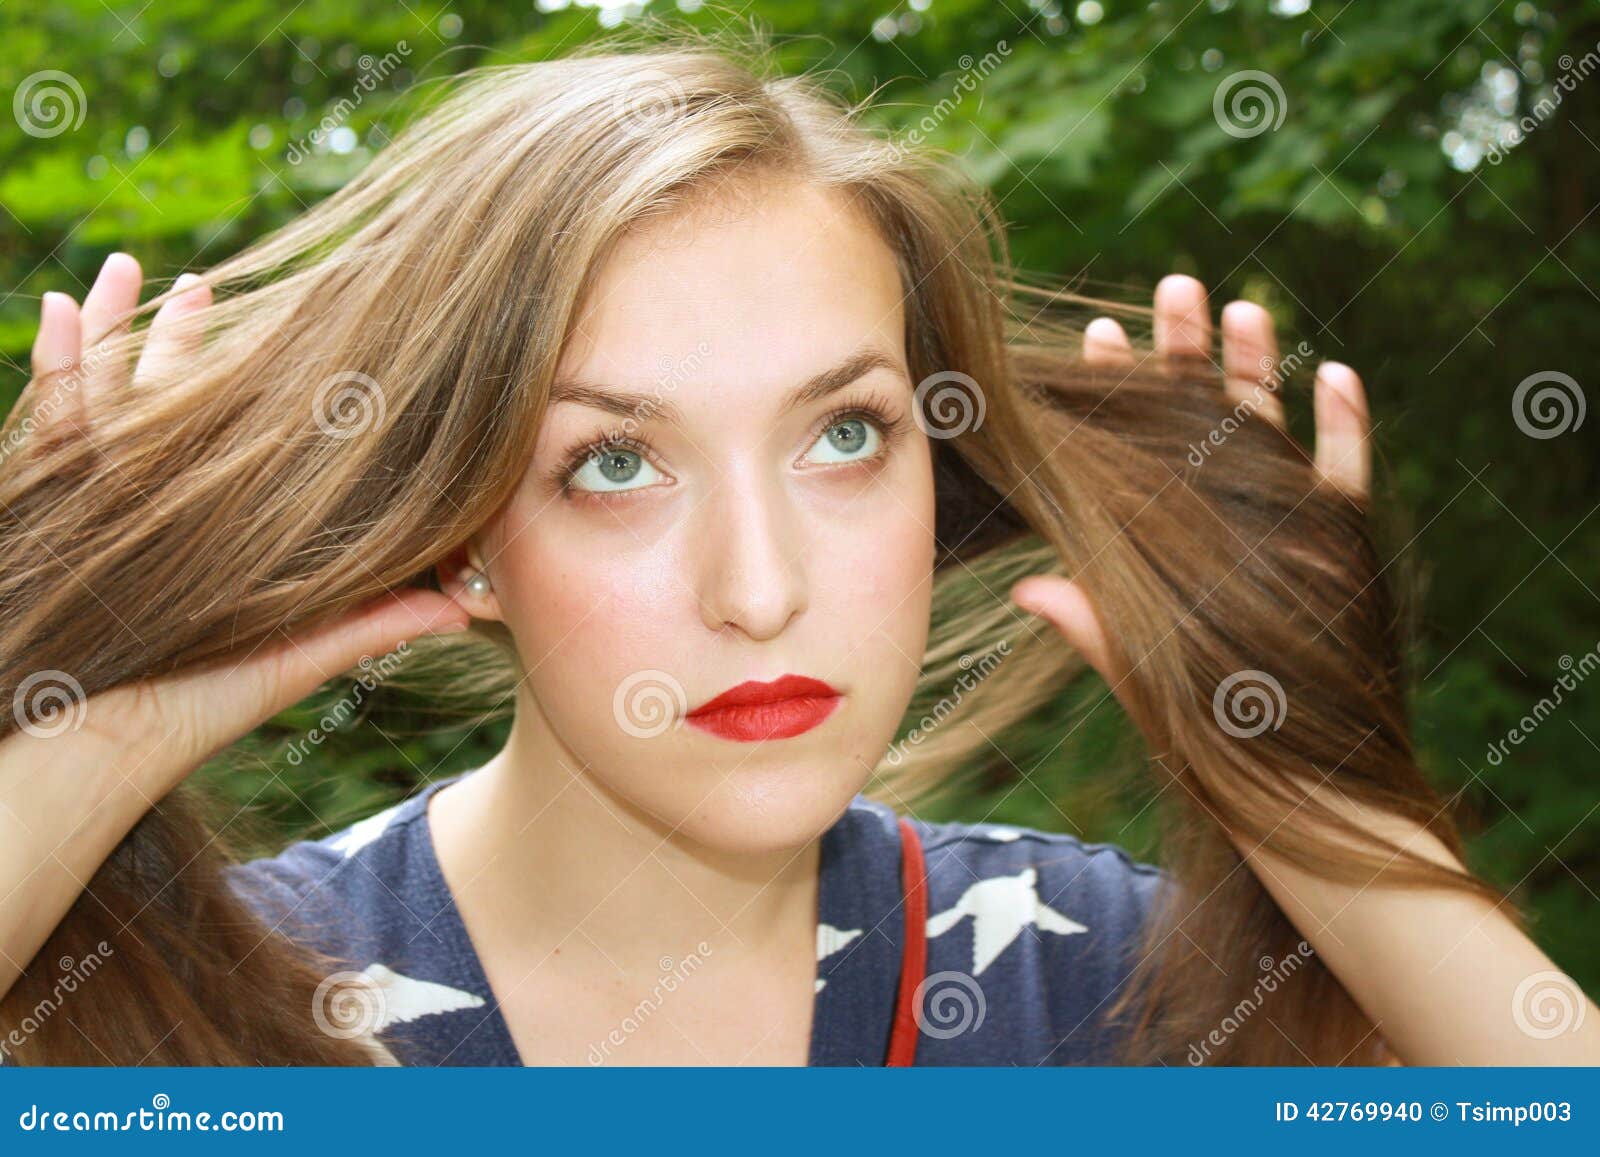 Girl flipping her hair stock photo. Image of face, close - 42769940